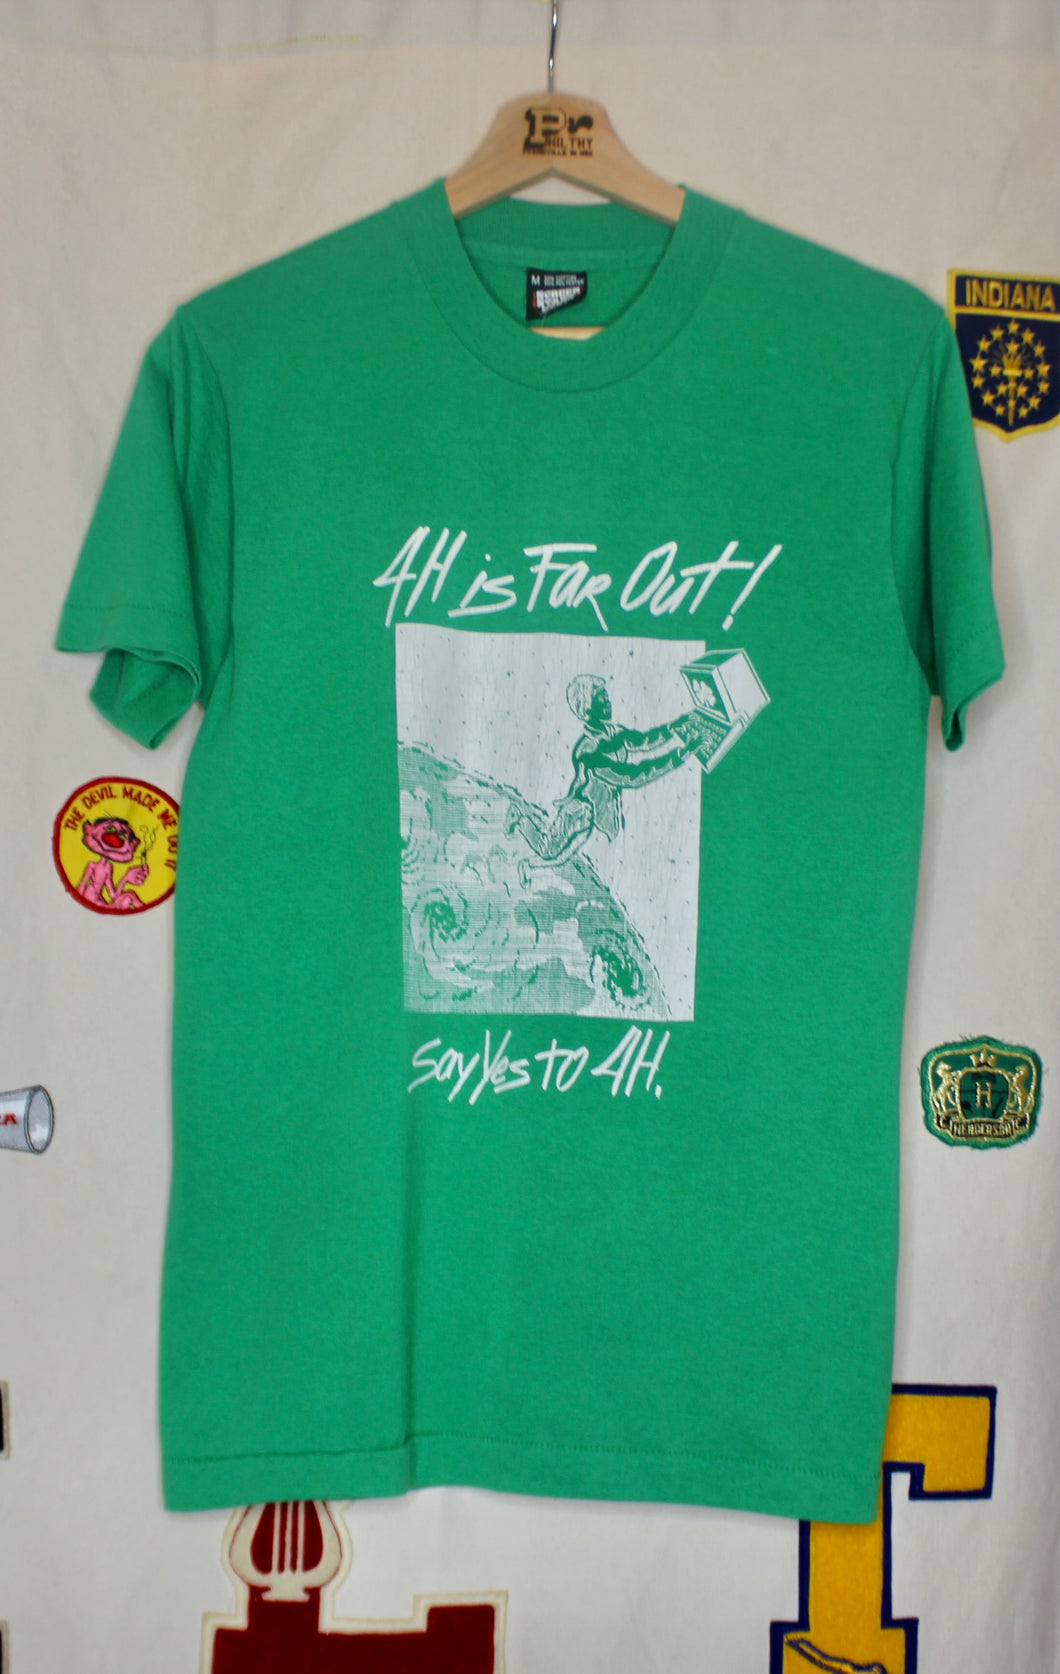 4H is Far Out T-Shirt: M